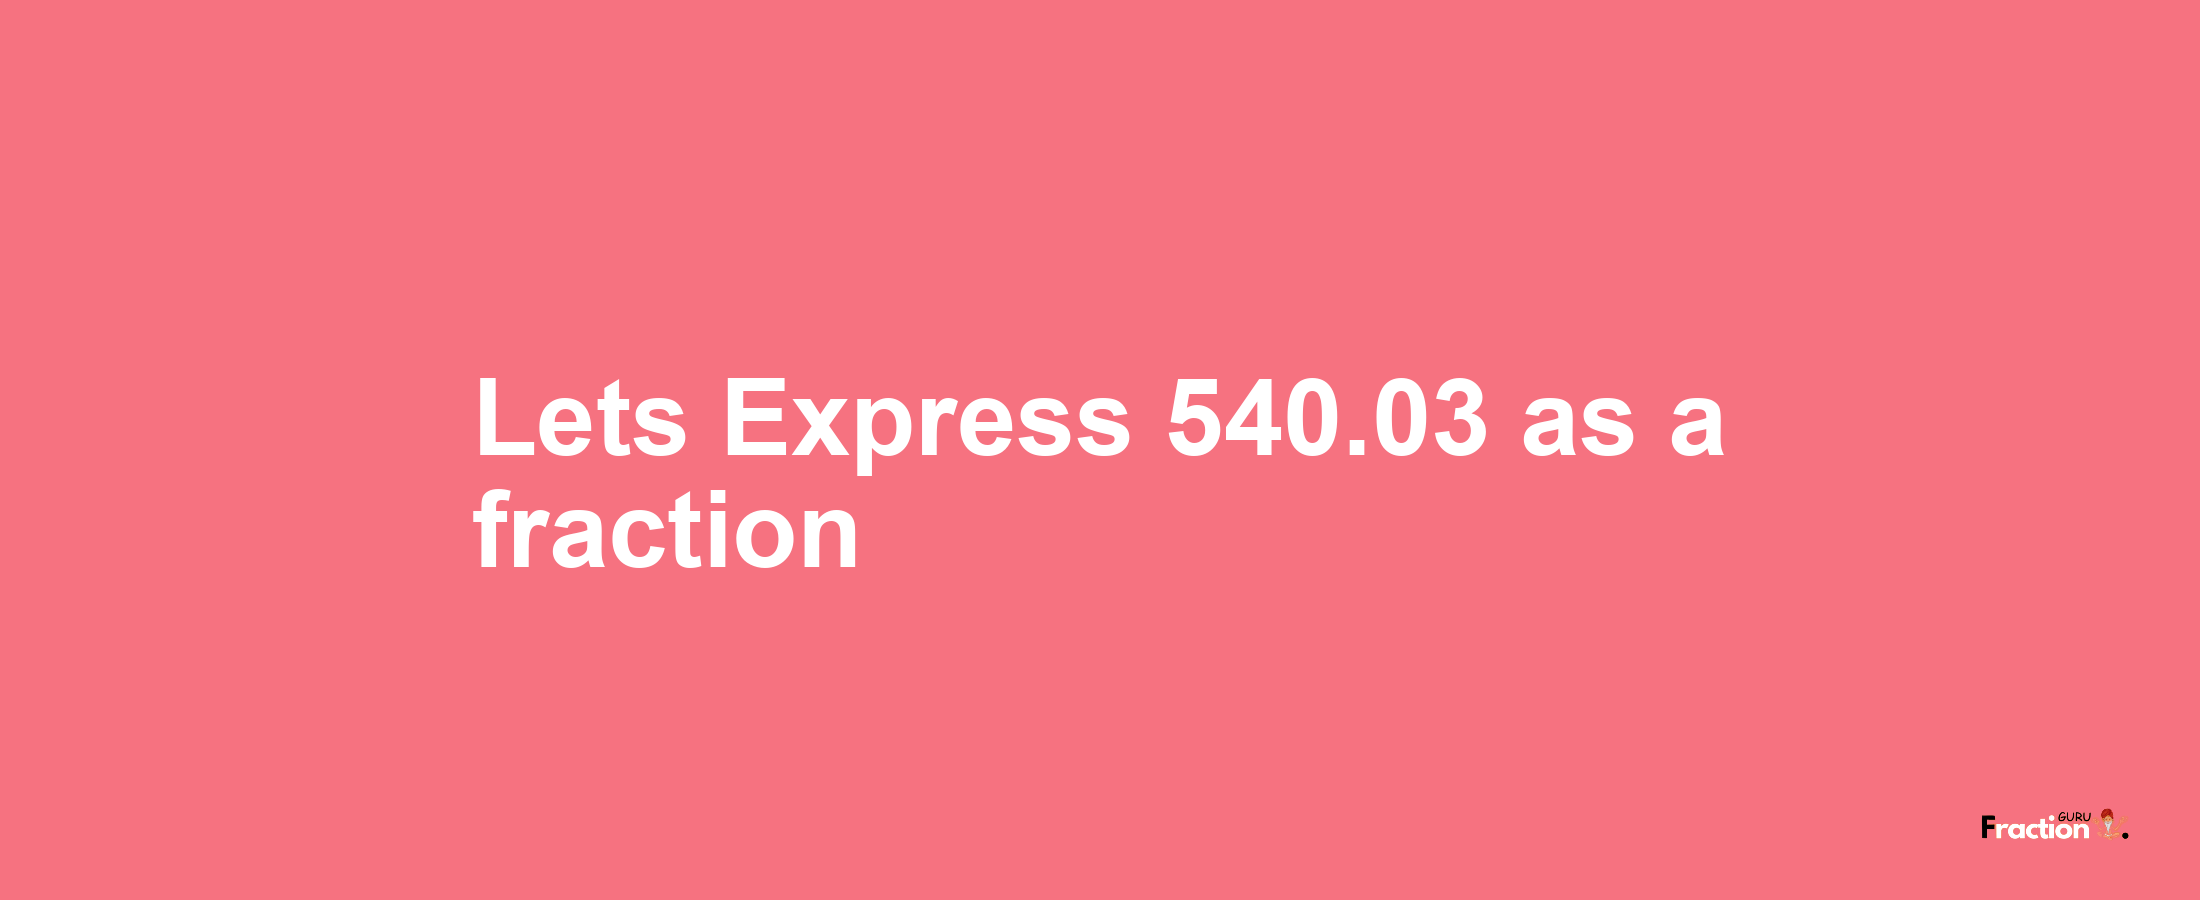 Lets Express 540.03 as afraction